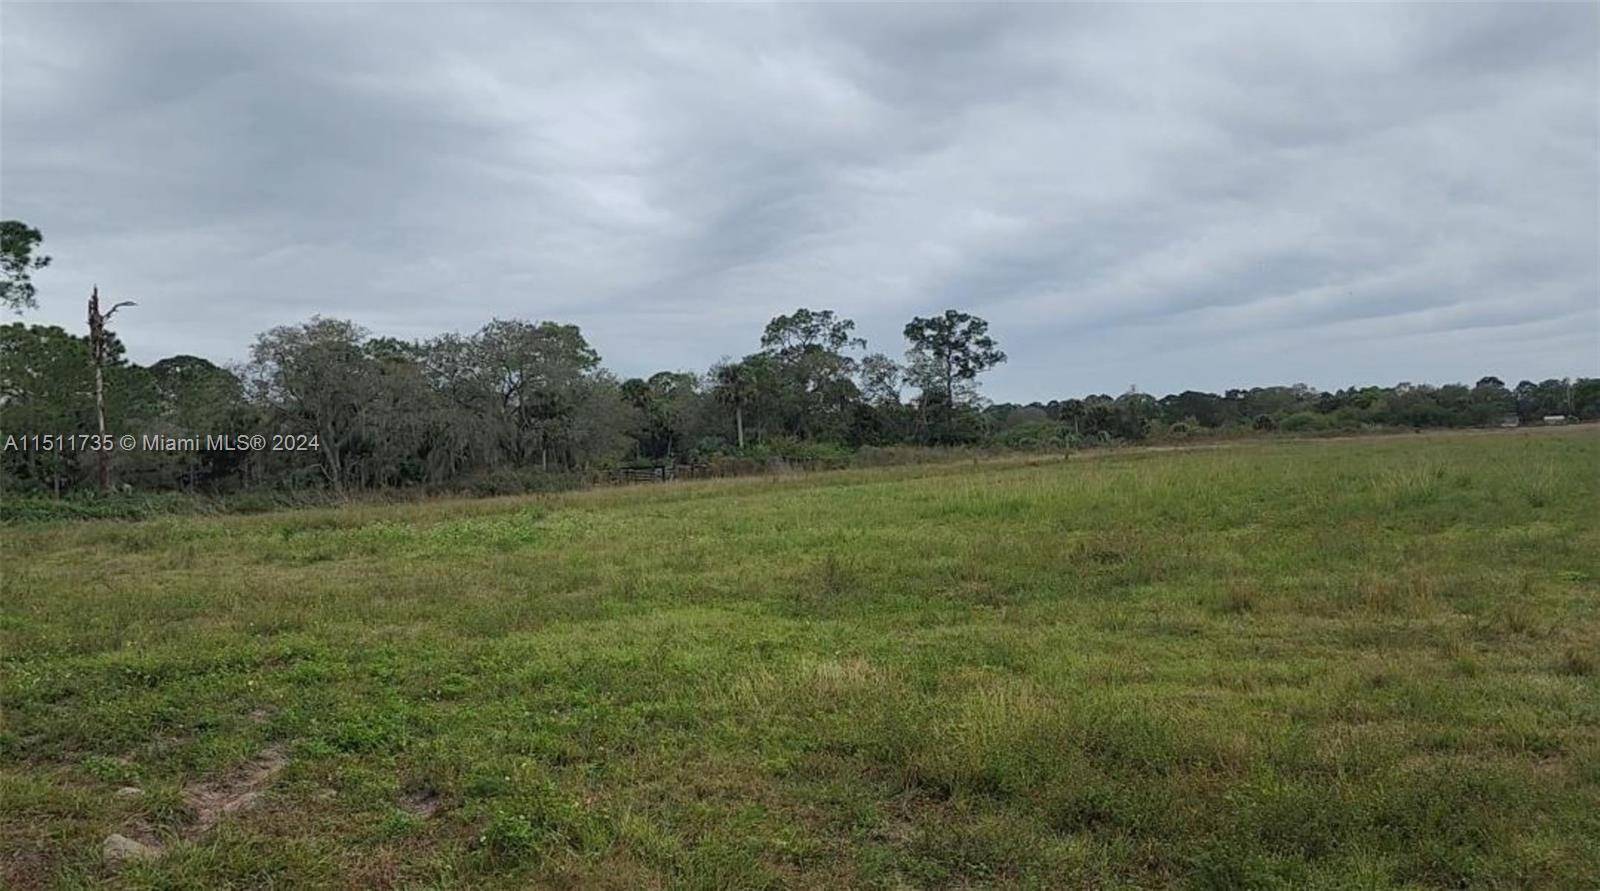 This 10. 19 acres of beautifully high, dry and cleared fenced farmland can be used to grow crops, raise cattle, horses or any agriculture farming business.